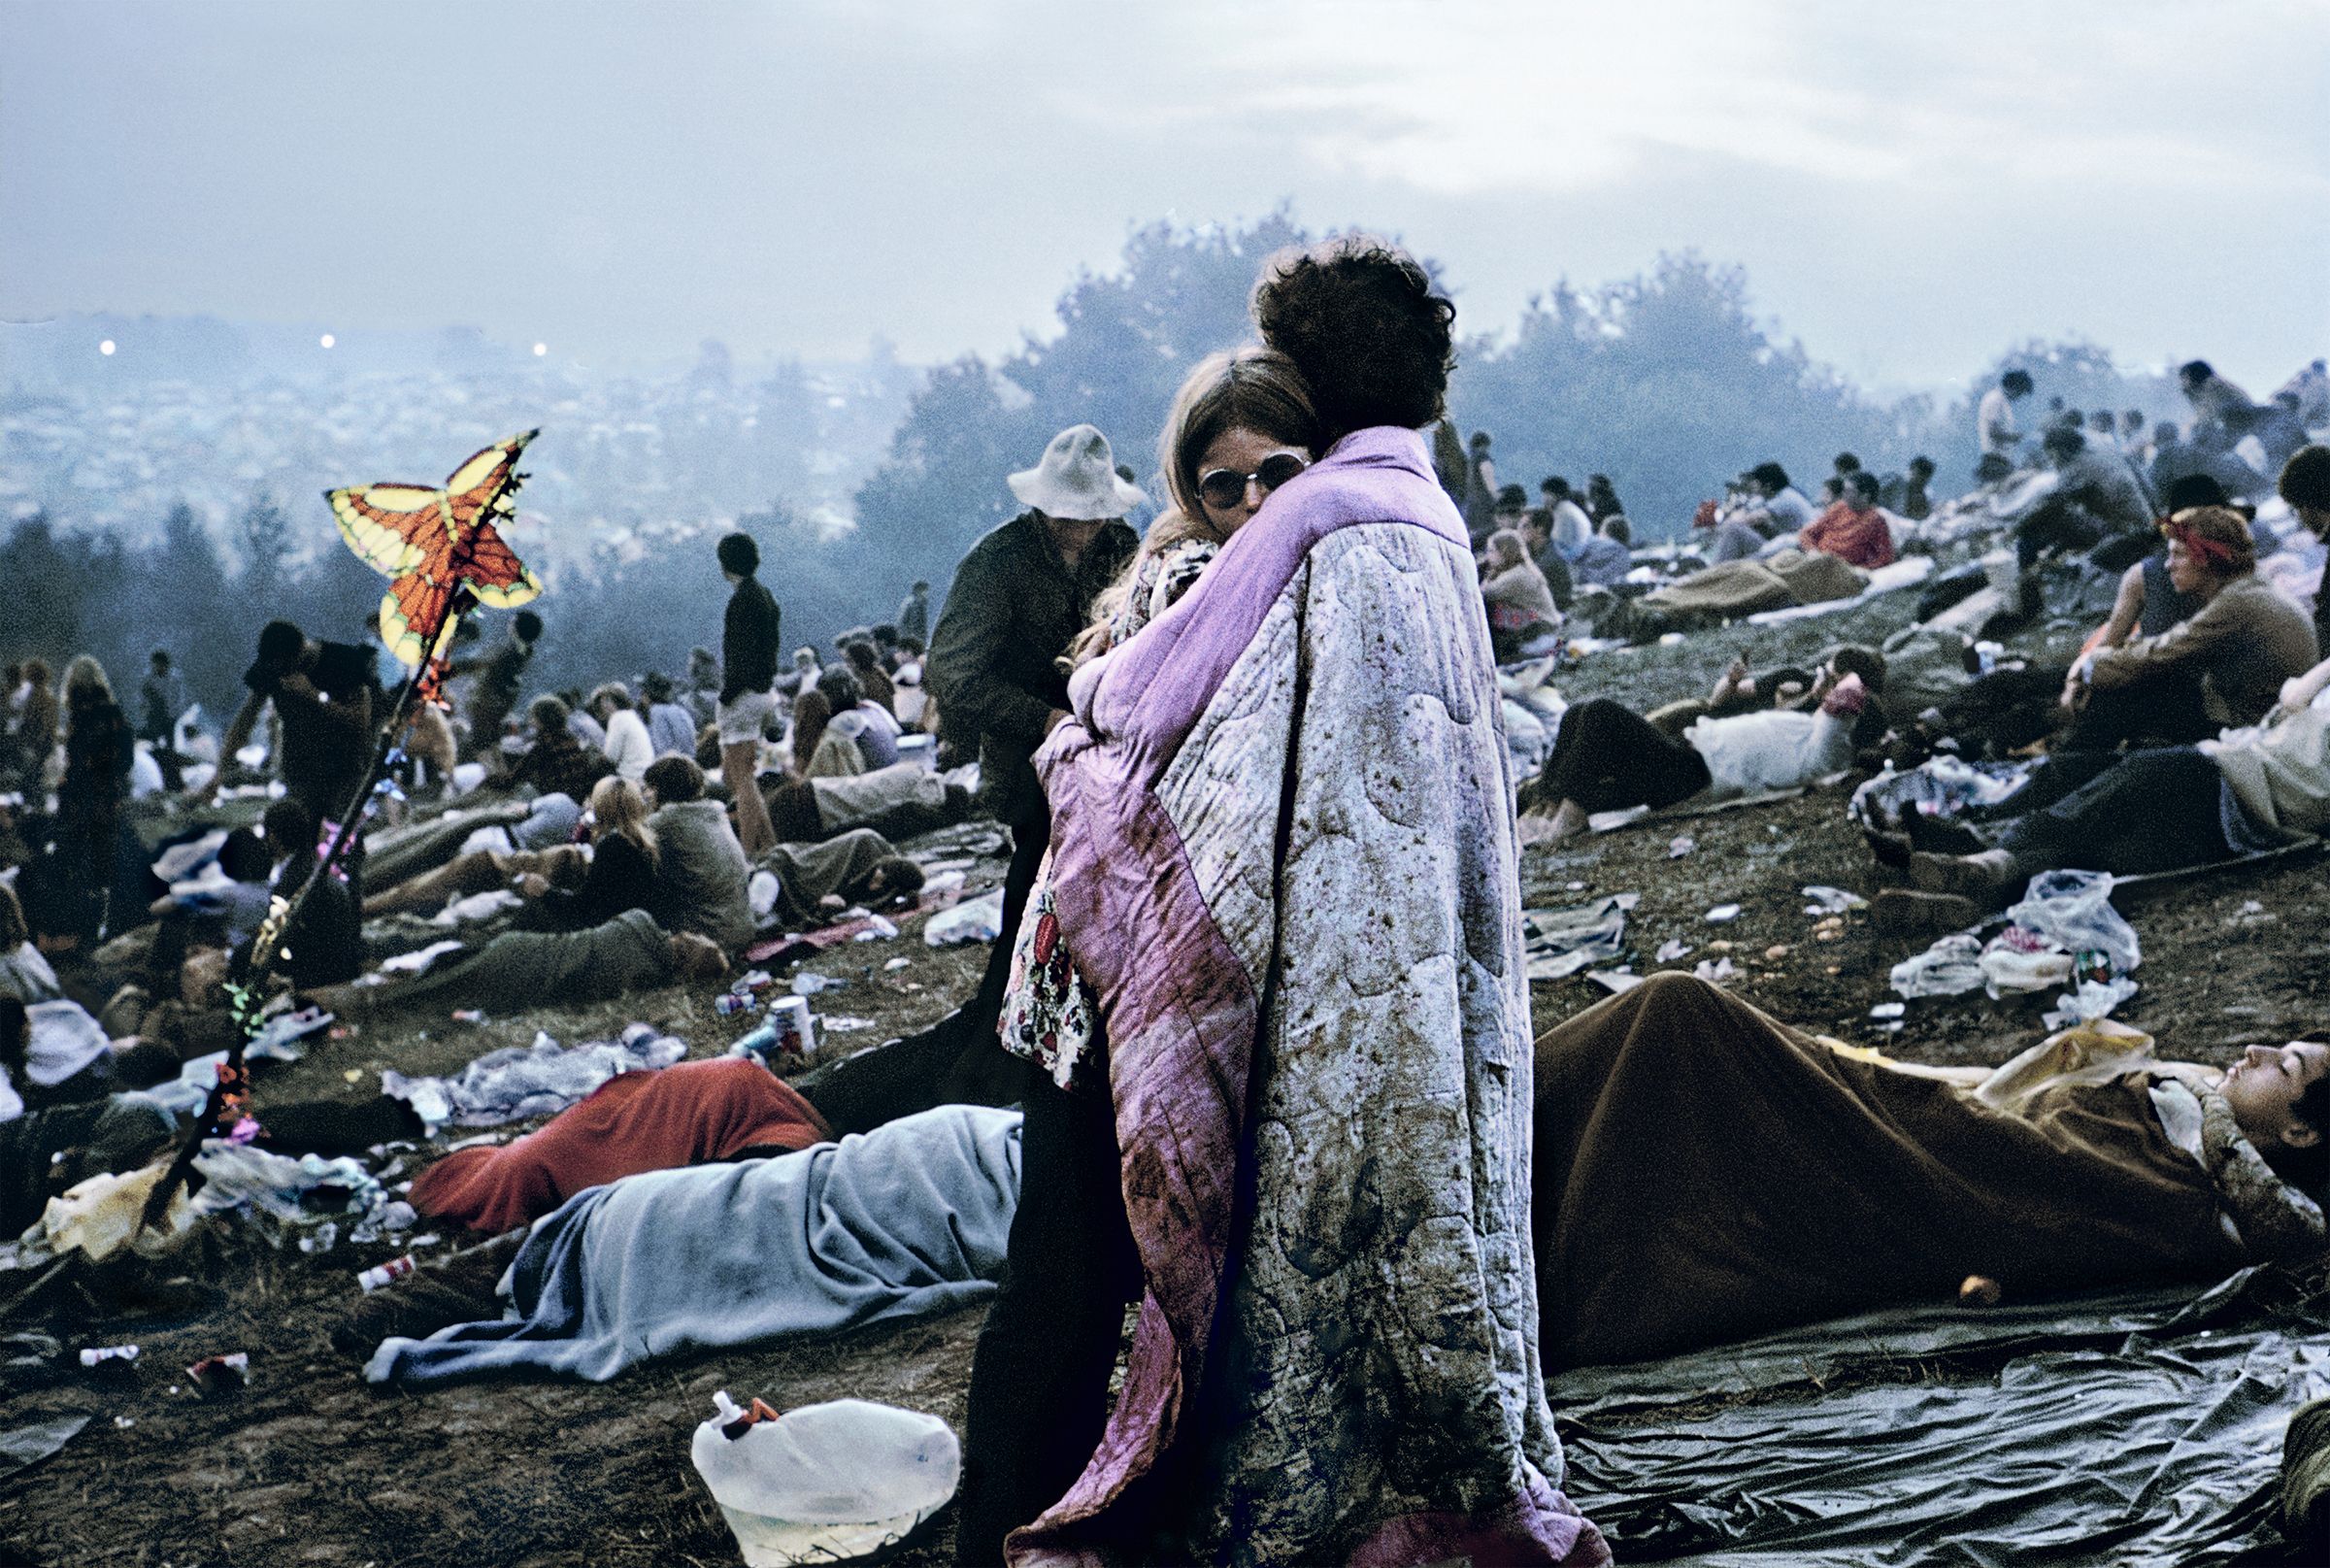 The Couple in the Woodstock Soundtrack Album Cover Photo